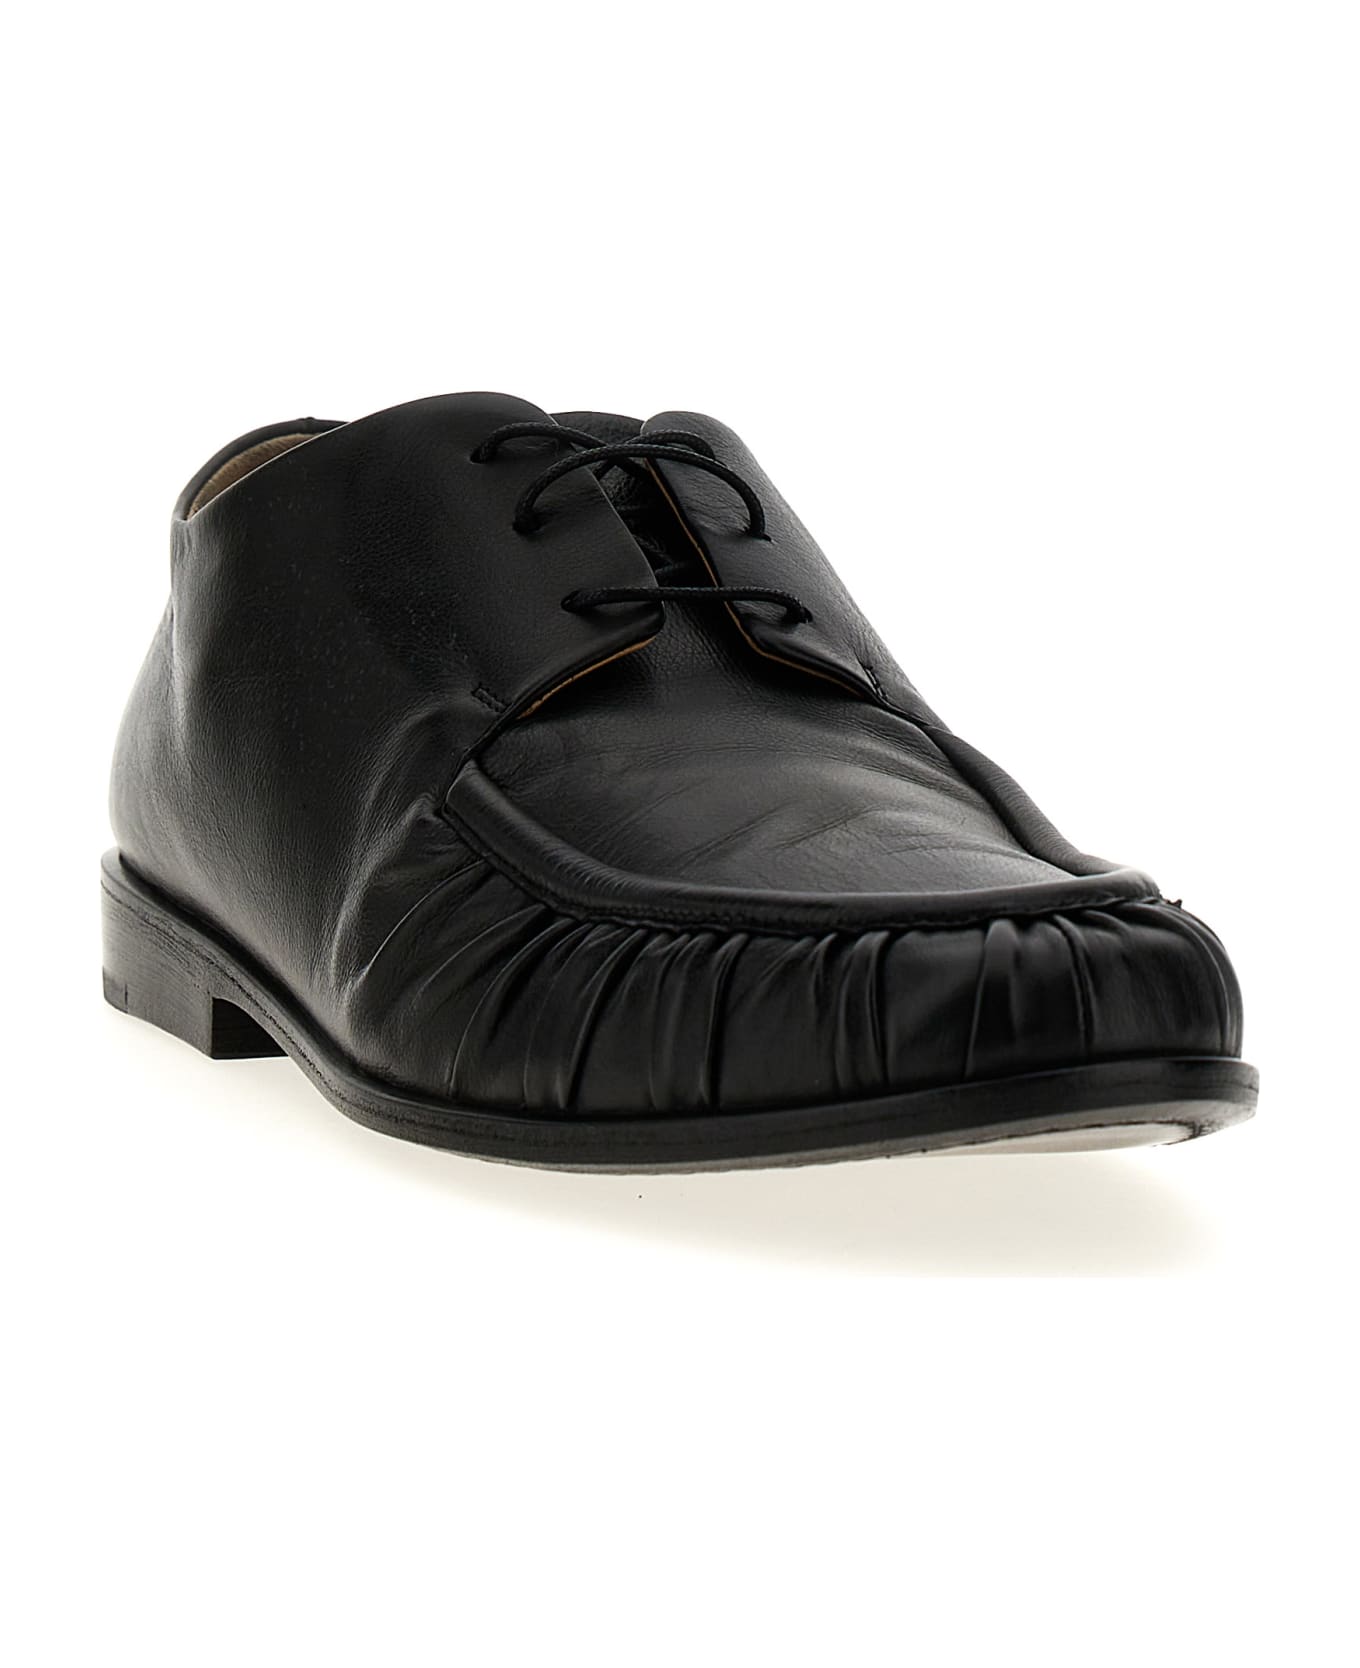 Marsell 'mocassino' Lace Up Shoes - Black  